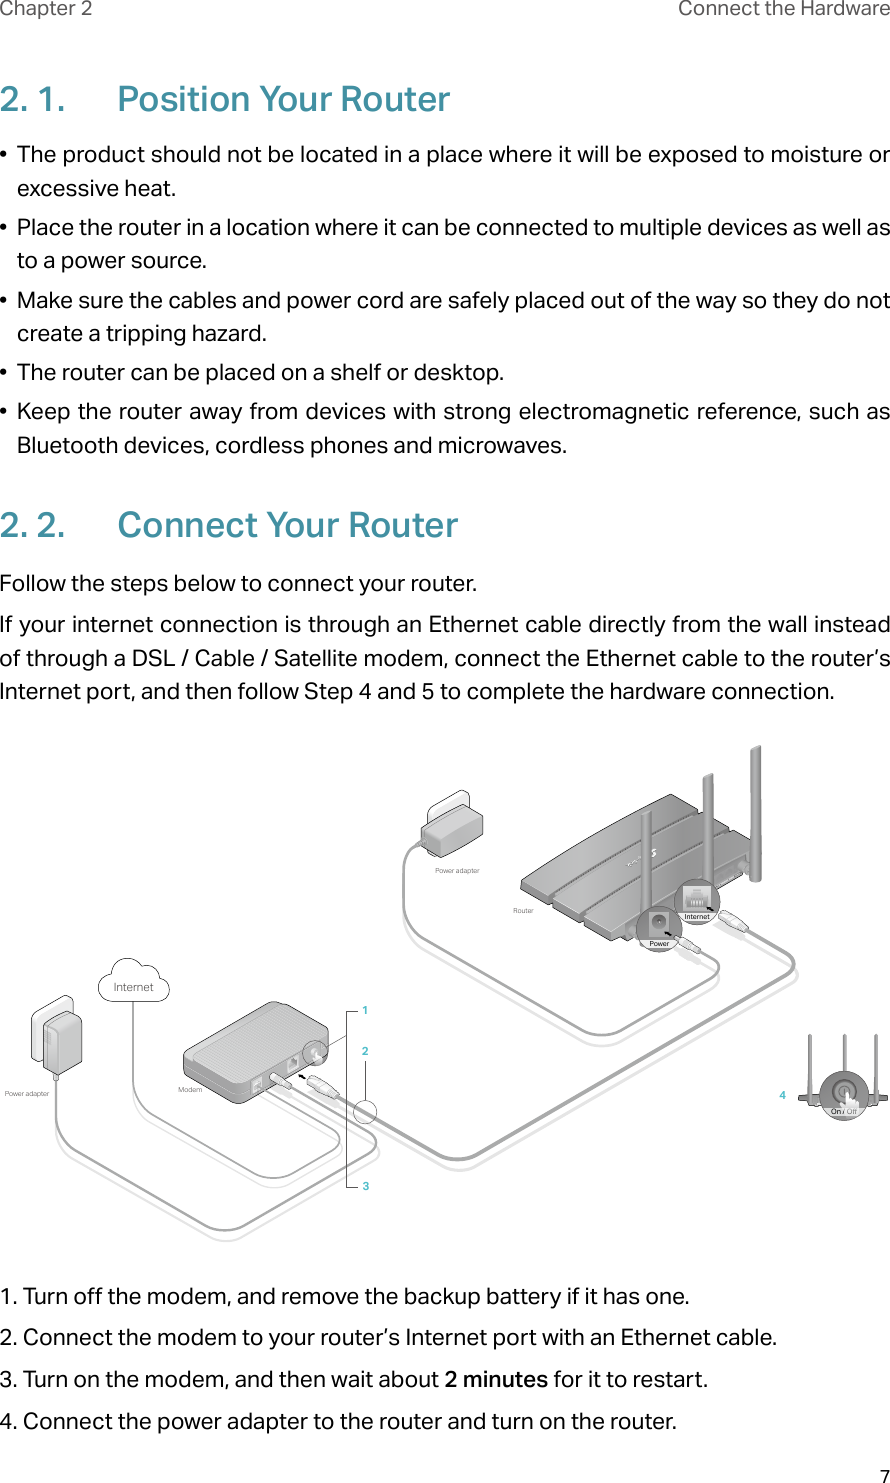 7Chapter 2 Connect the Hardware2. 1.  Position Your Router•  The product should not be located in a place where it will be exposed to moisture or excessive heat.•  Place the router in a location where it can be connected to multiple devices as well as to a power source.•  Make sure the cables and power cord are safely placed out of the way so they do not create a tripping hazard.•  The router can be placed on a shelf or desktop.•  Keep the router away from devices with strong electromagnetic reference, such as Bluetooth devices, cordless phones and microwaves.2. 2.  Connect Your RouterFollow the steps below to connect your router.If your internet connection is through an Ethernet cable directly from the wall instead of through a DSL / Cable / Satellite modem, connect the Ethernet cable to the router’s Internet port, and then follow Step 4 and 5 to complete the hardware connection.4ModemPower adapterPower adapterRouter123InternetOn / OInternetPower1. Turn off the modem, and remove the backup battery if it has one.2. Connect the modem to your router’s Internet port with an Ethernet cable.3. Turn on the modem, and then wait about 2 minutes for it to restart.4. Connect the power adapter to the router and turn on the router.